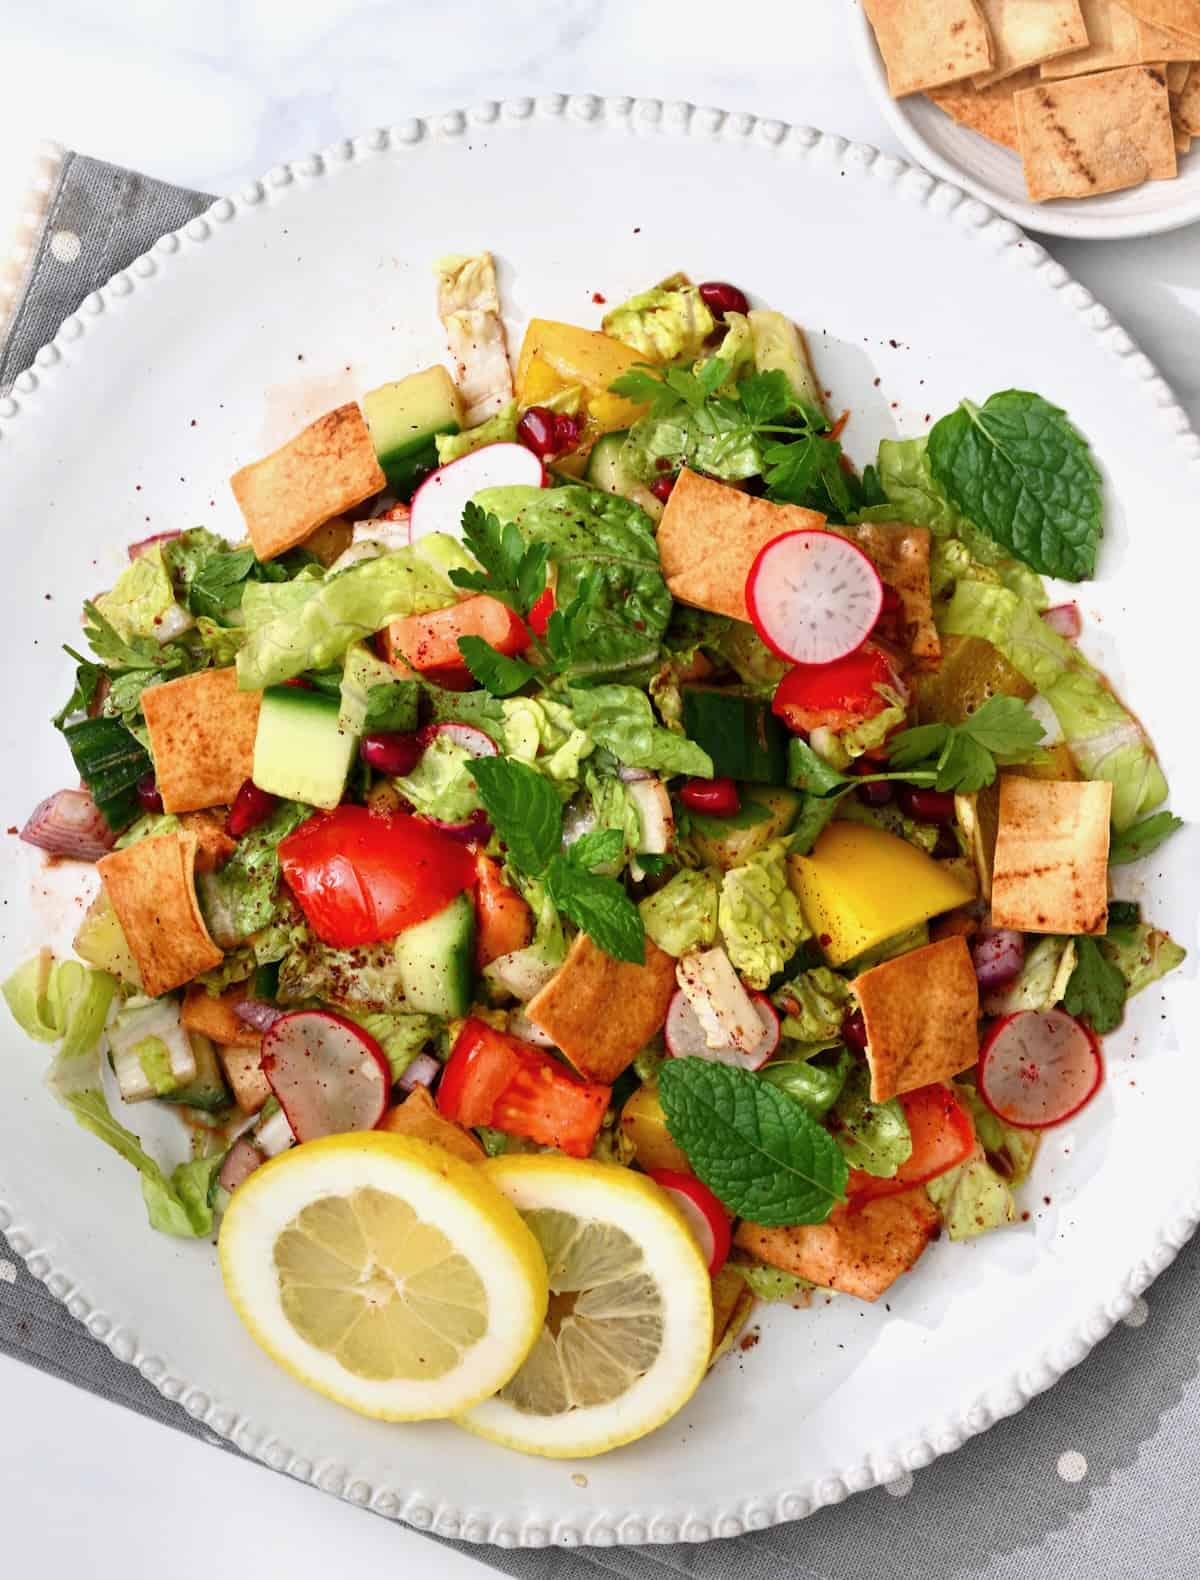 A serving of Lebanese fattoush salad topped with pita chips and mint